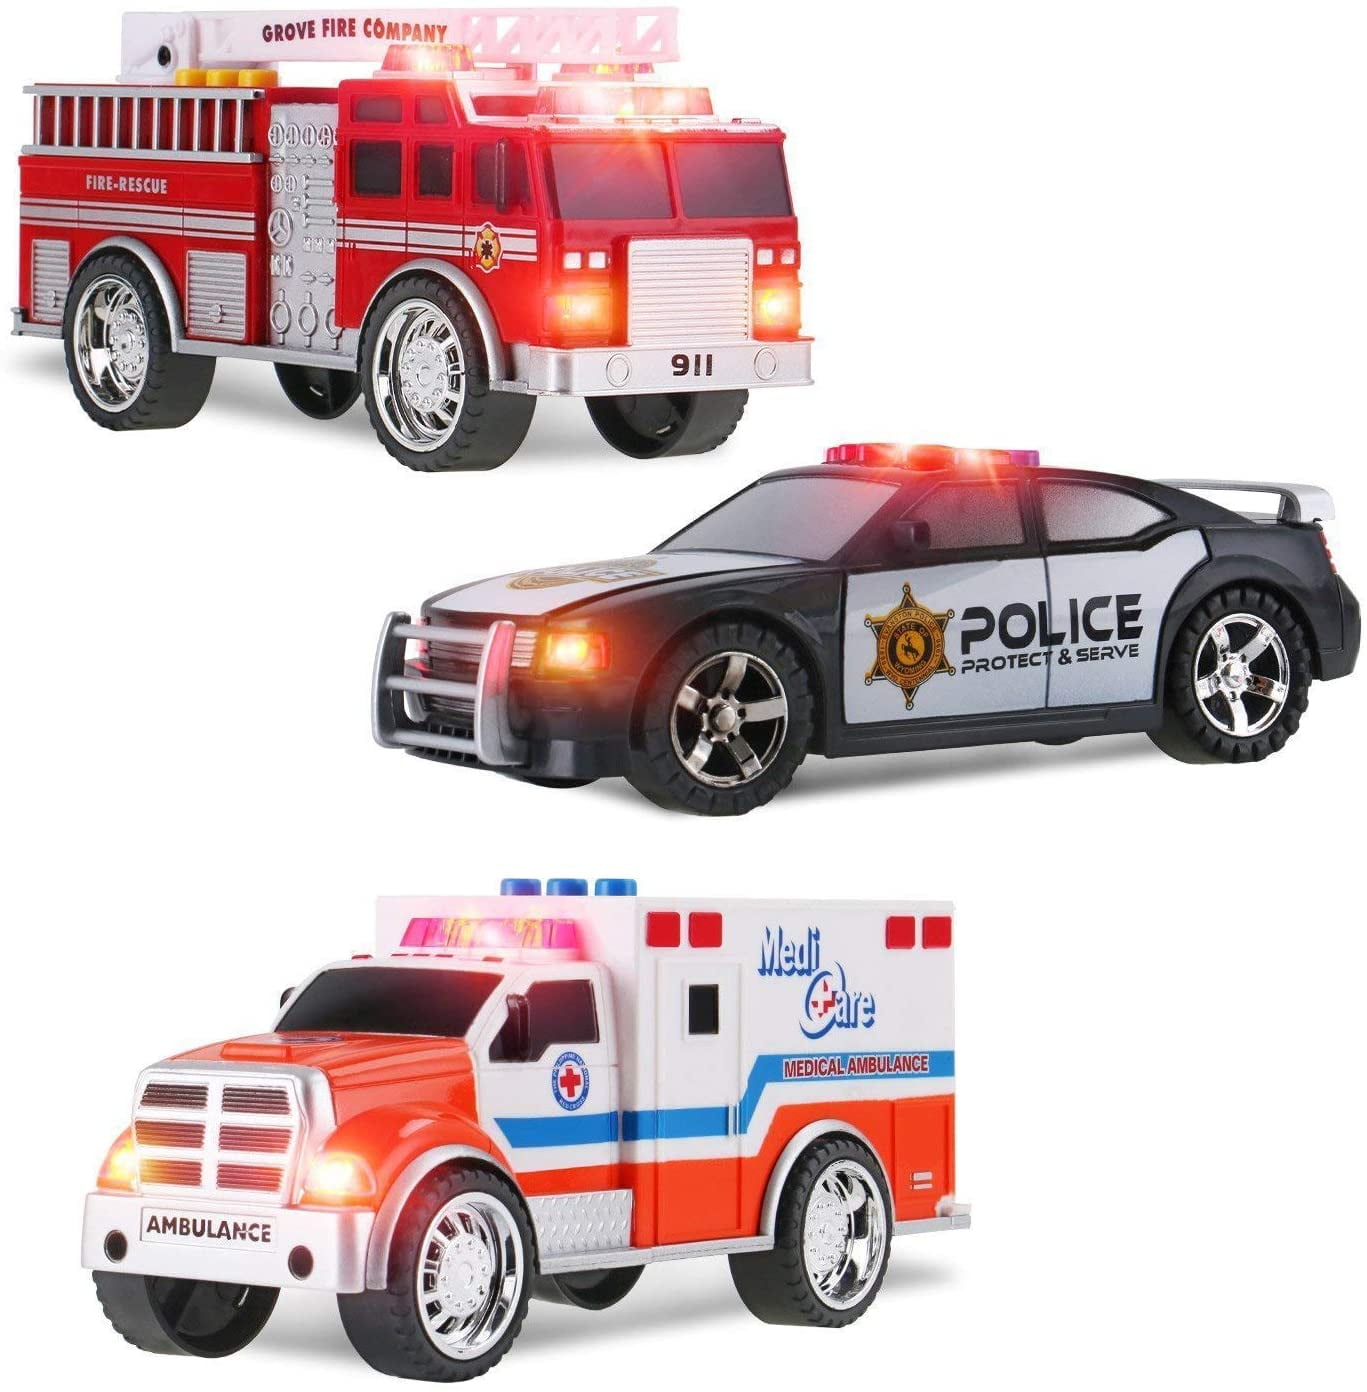 Ambulance & More Wooden City Vehicles Set for Kids Fire Truck Police 